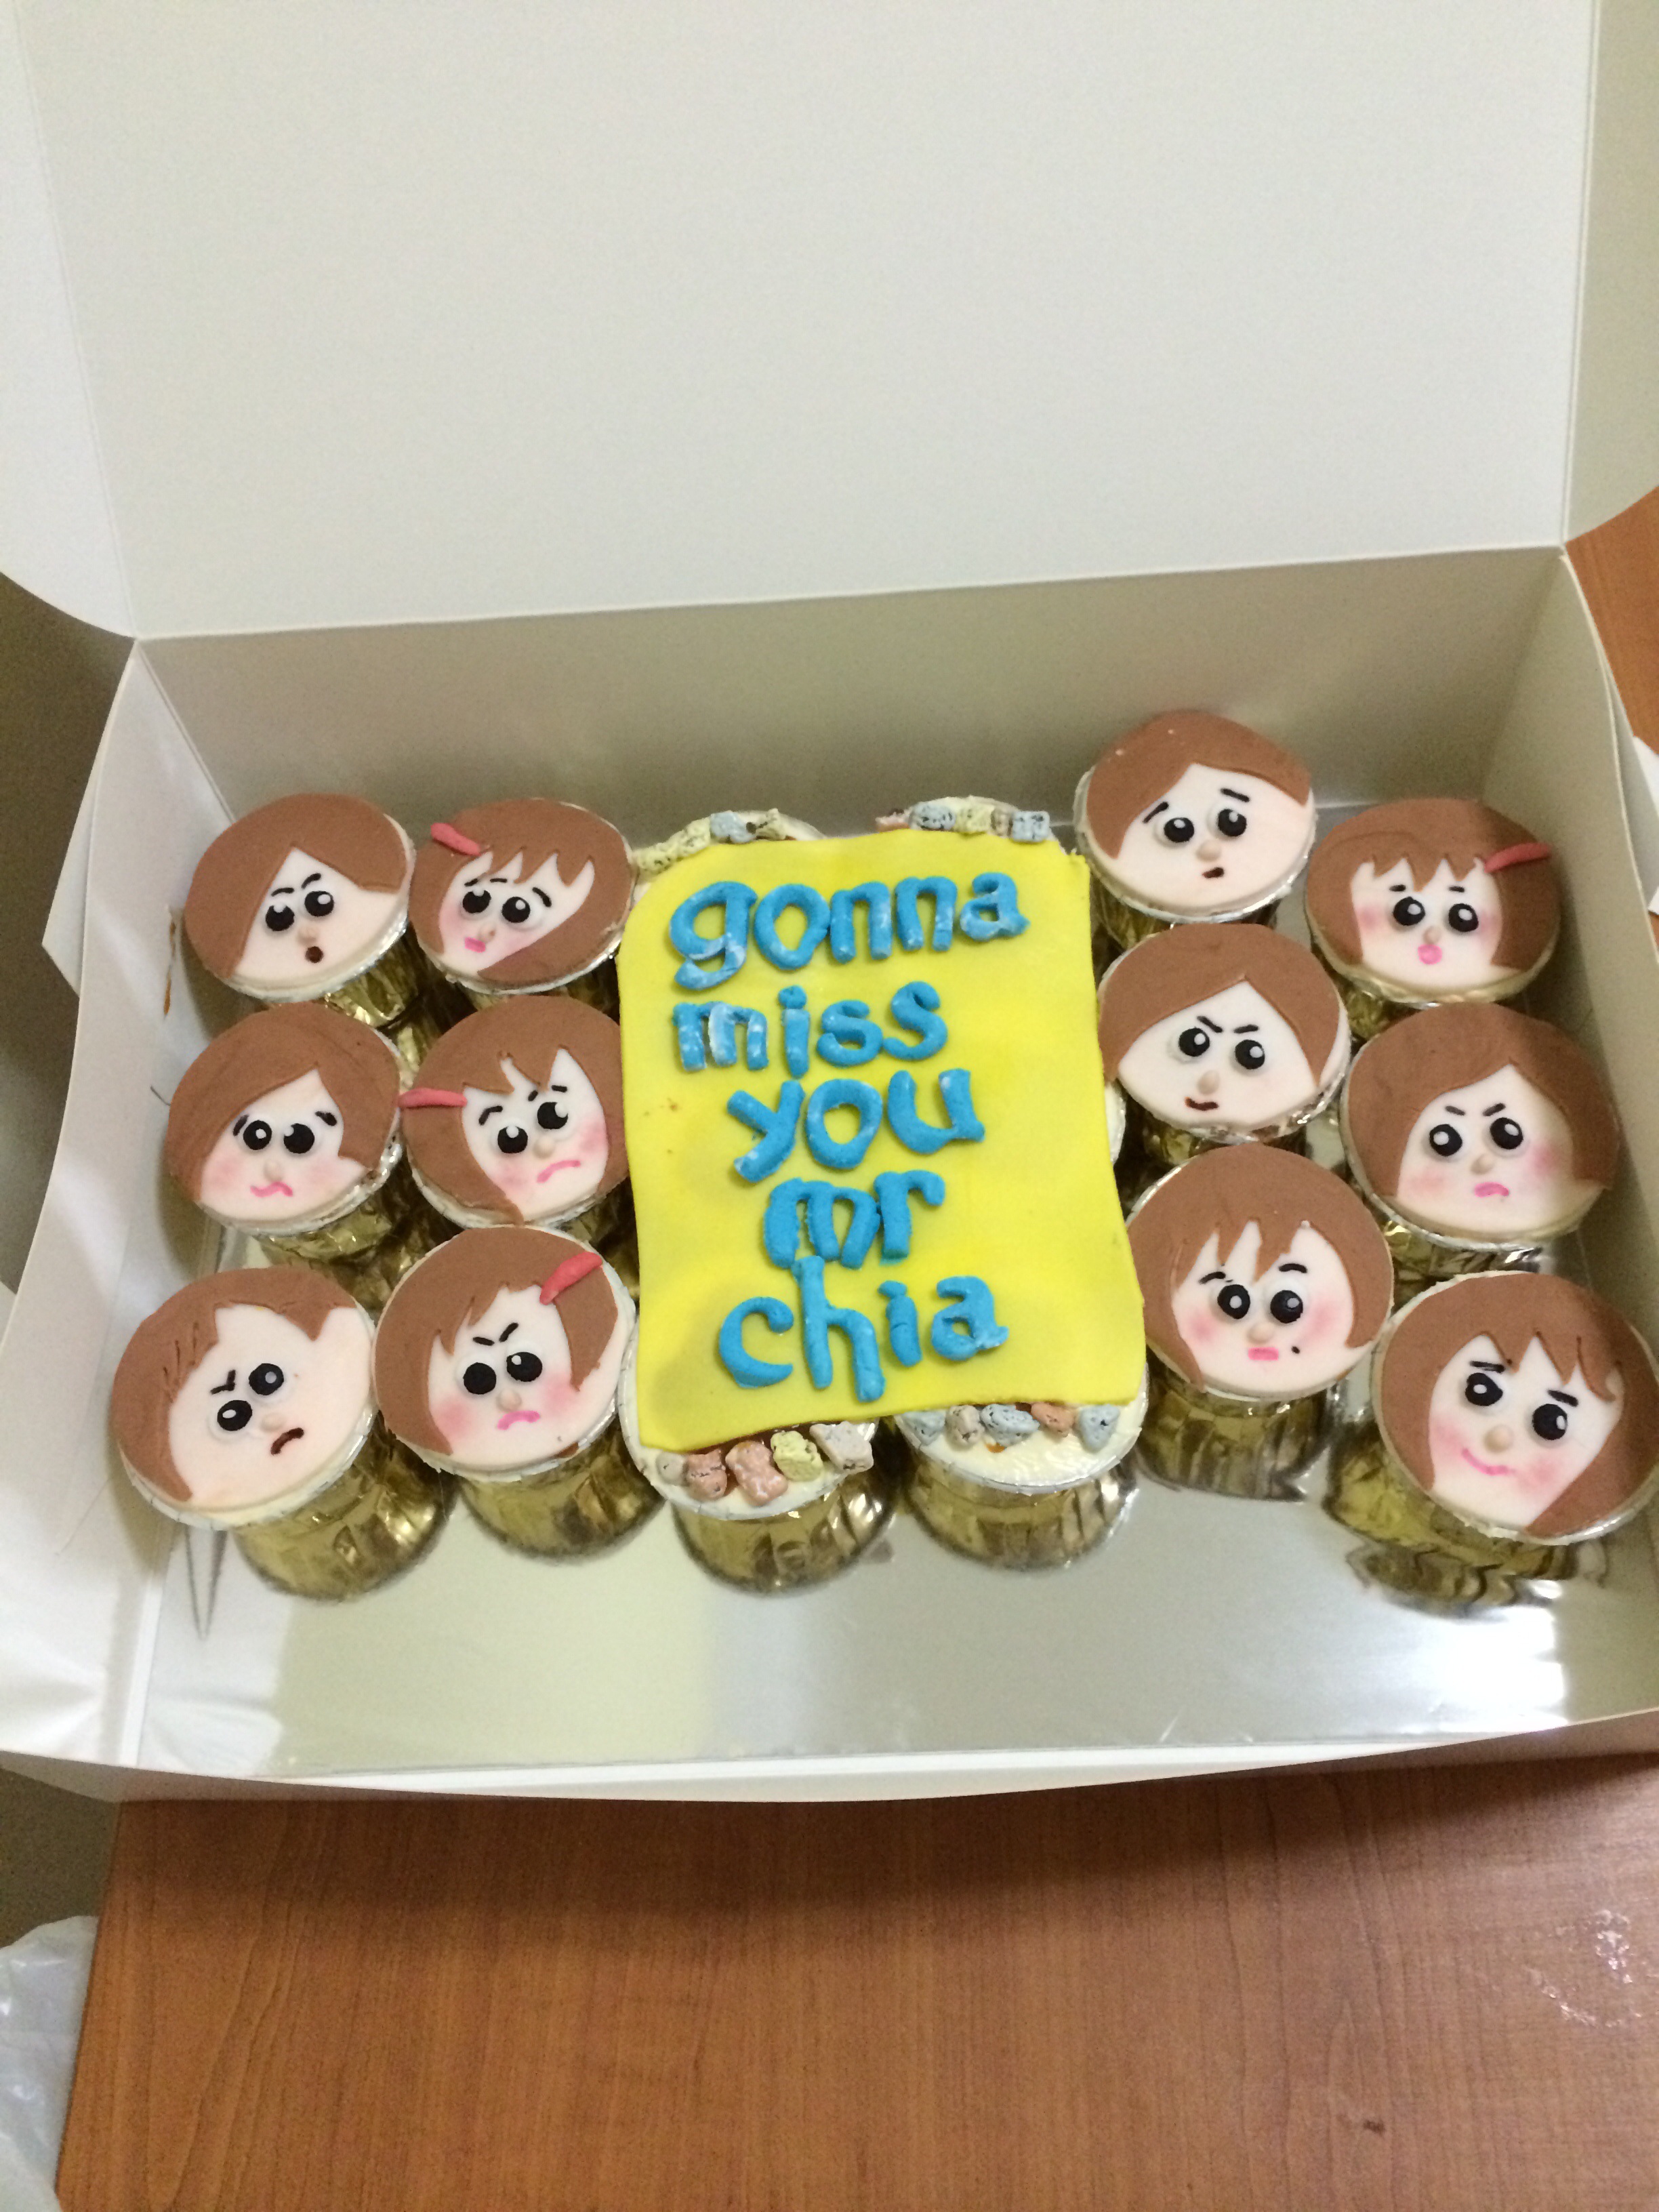 15 Funniest Farewell Cakes Employees Got On Their Last Day | DeMilked